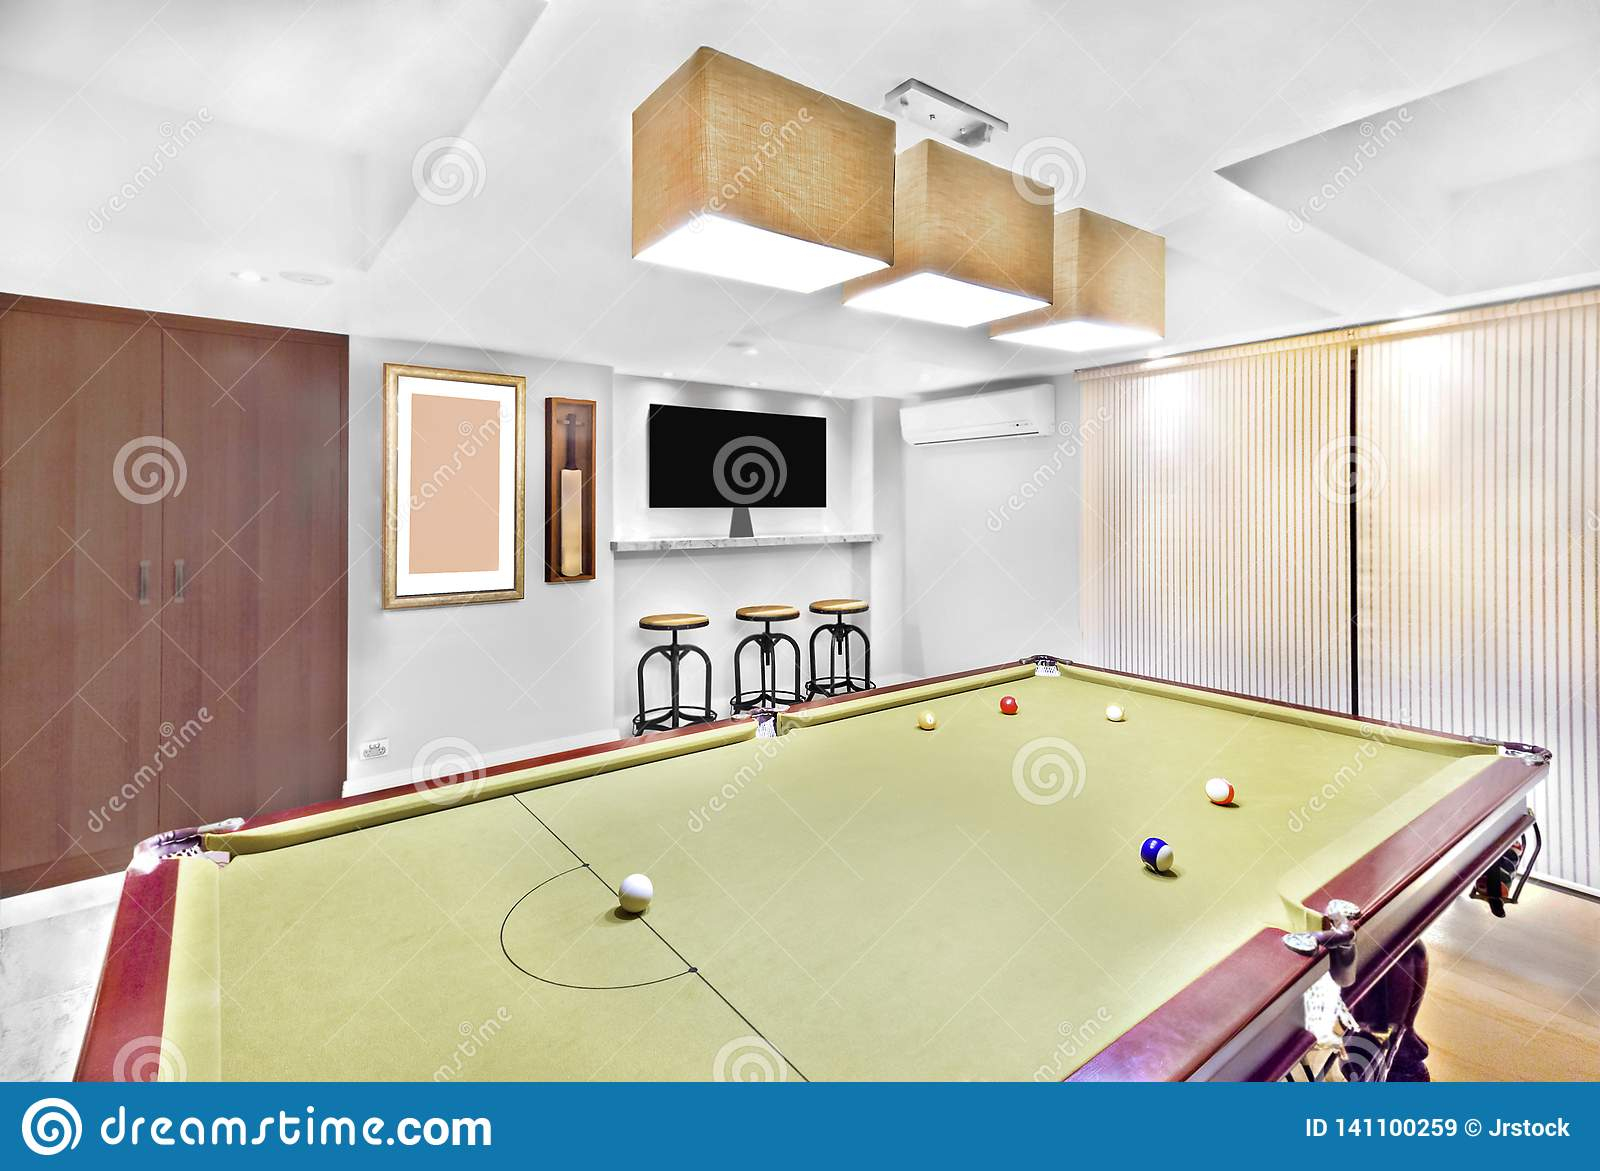 Modern Pool Table In Luxury Room With Furniture Stock Image throughout size 1600 X 1171